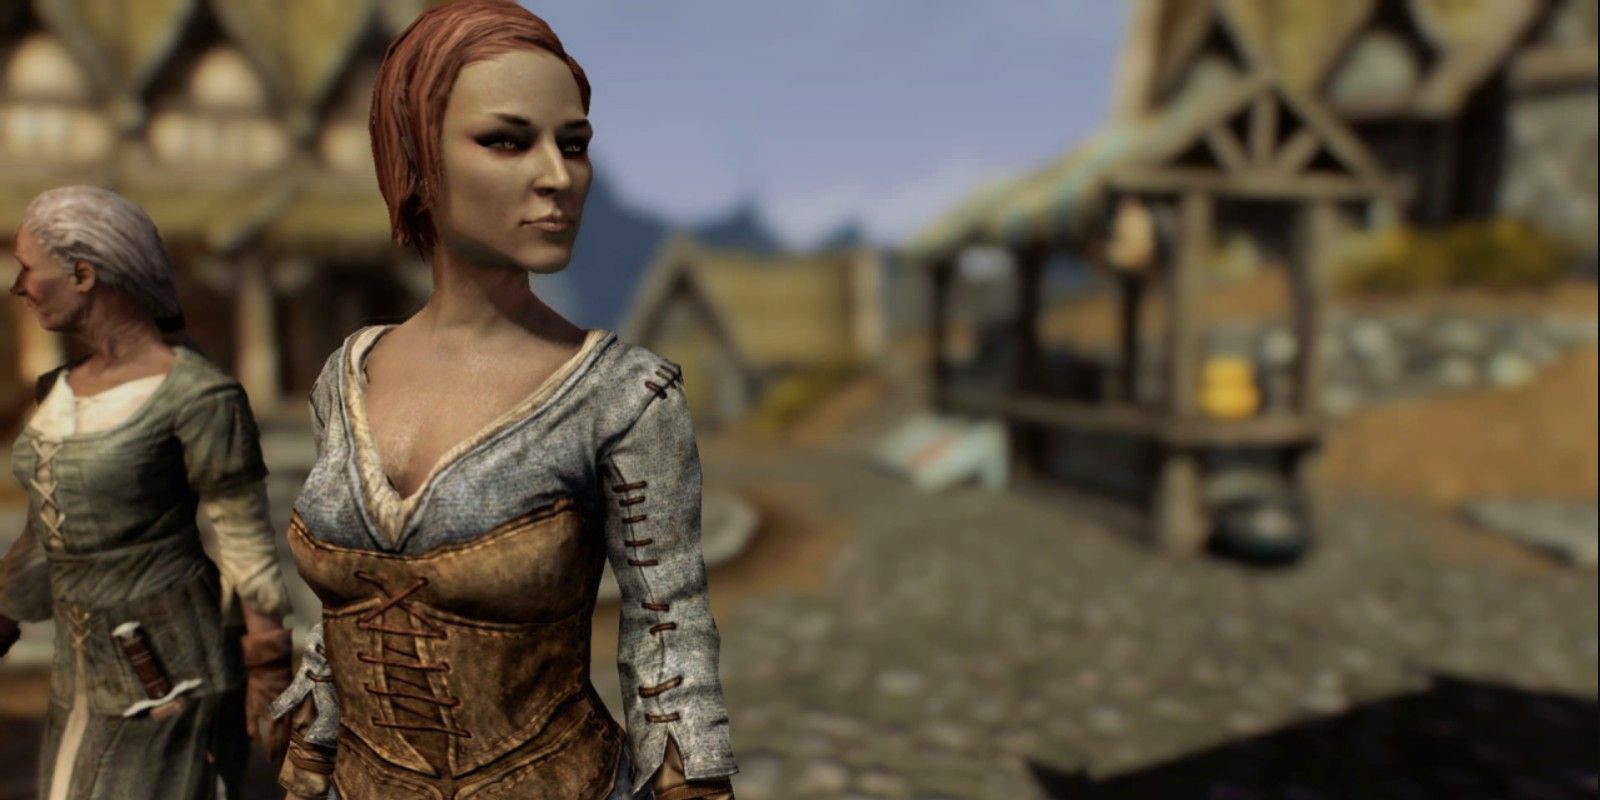 Ysolda standing in Whiterun, looking off to the side on a sunny day in Skryim.